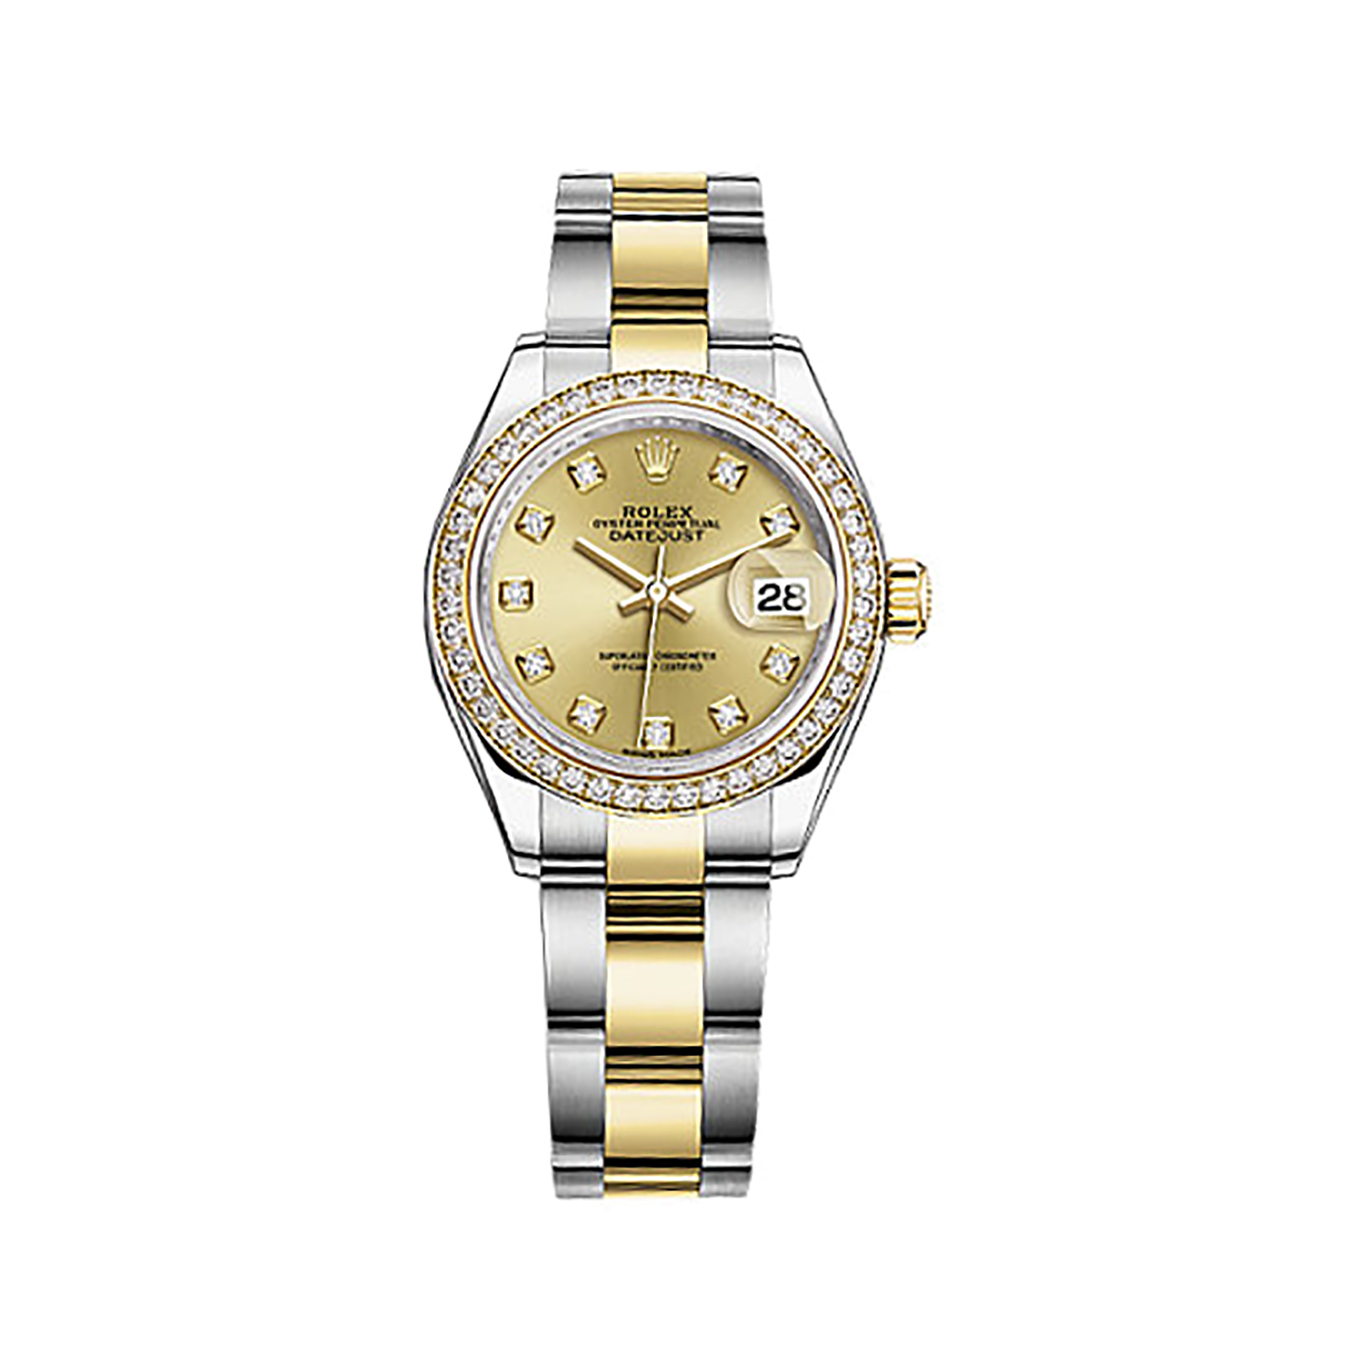 Lady-Datejust 28 279383RBR Gold & Stainless Steel & Diamonds Watch (Champagne Set with Diamonds)